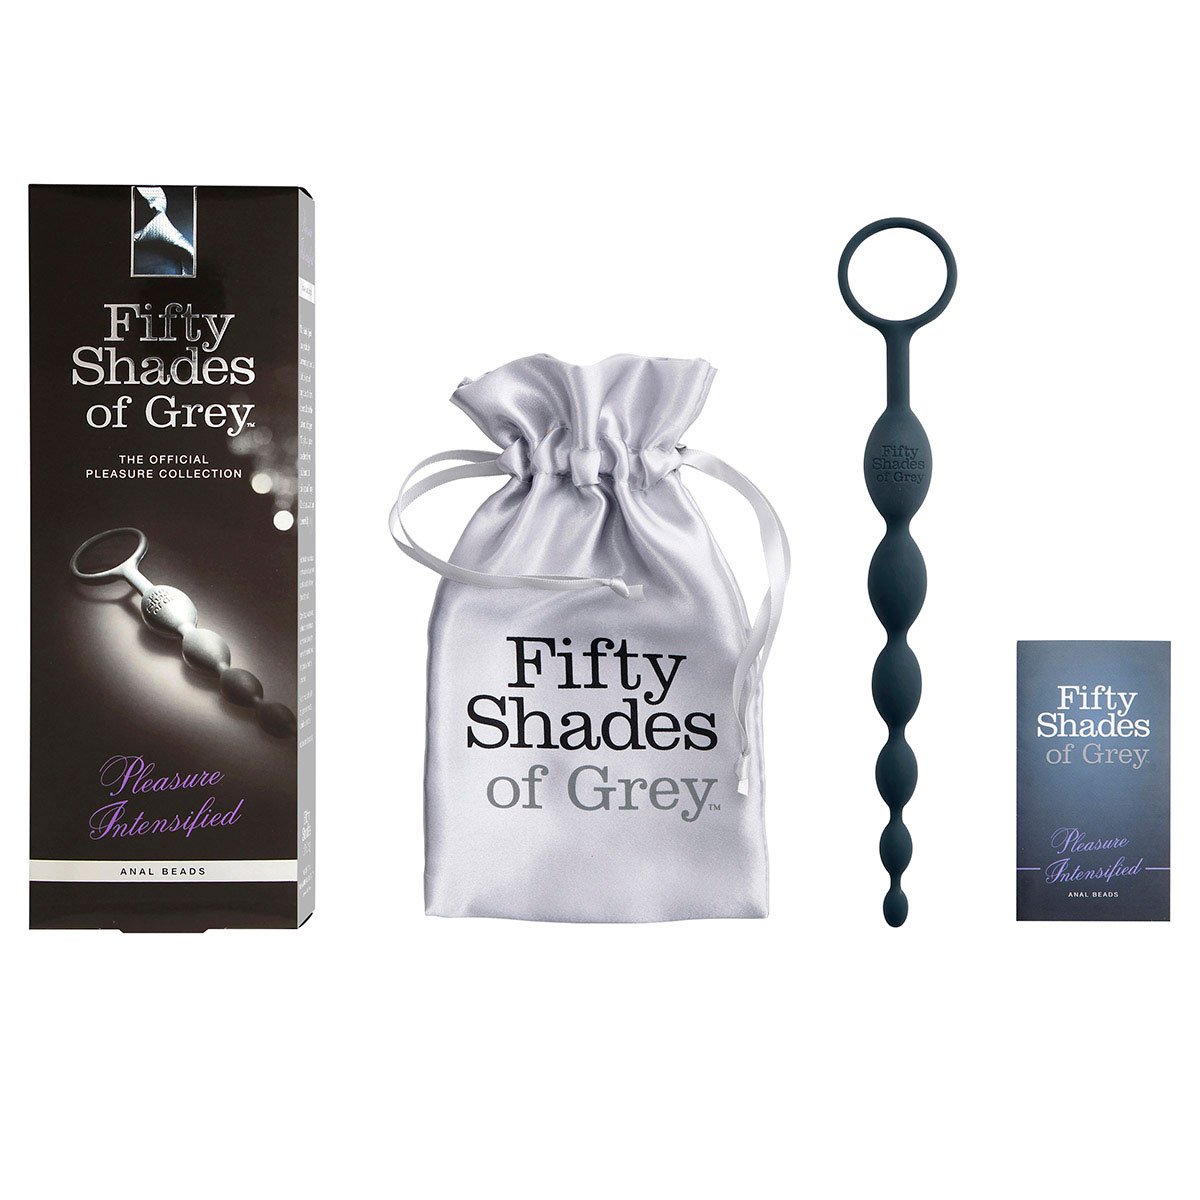 Fifty Shades Pleasure Intensified Anal Beads - Buy At Luxury Toy X - Free 3-Day Shipping